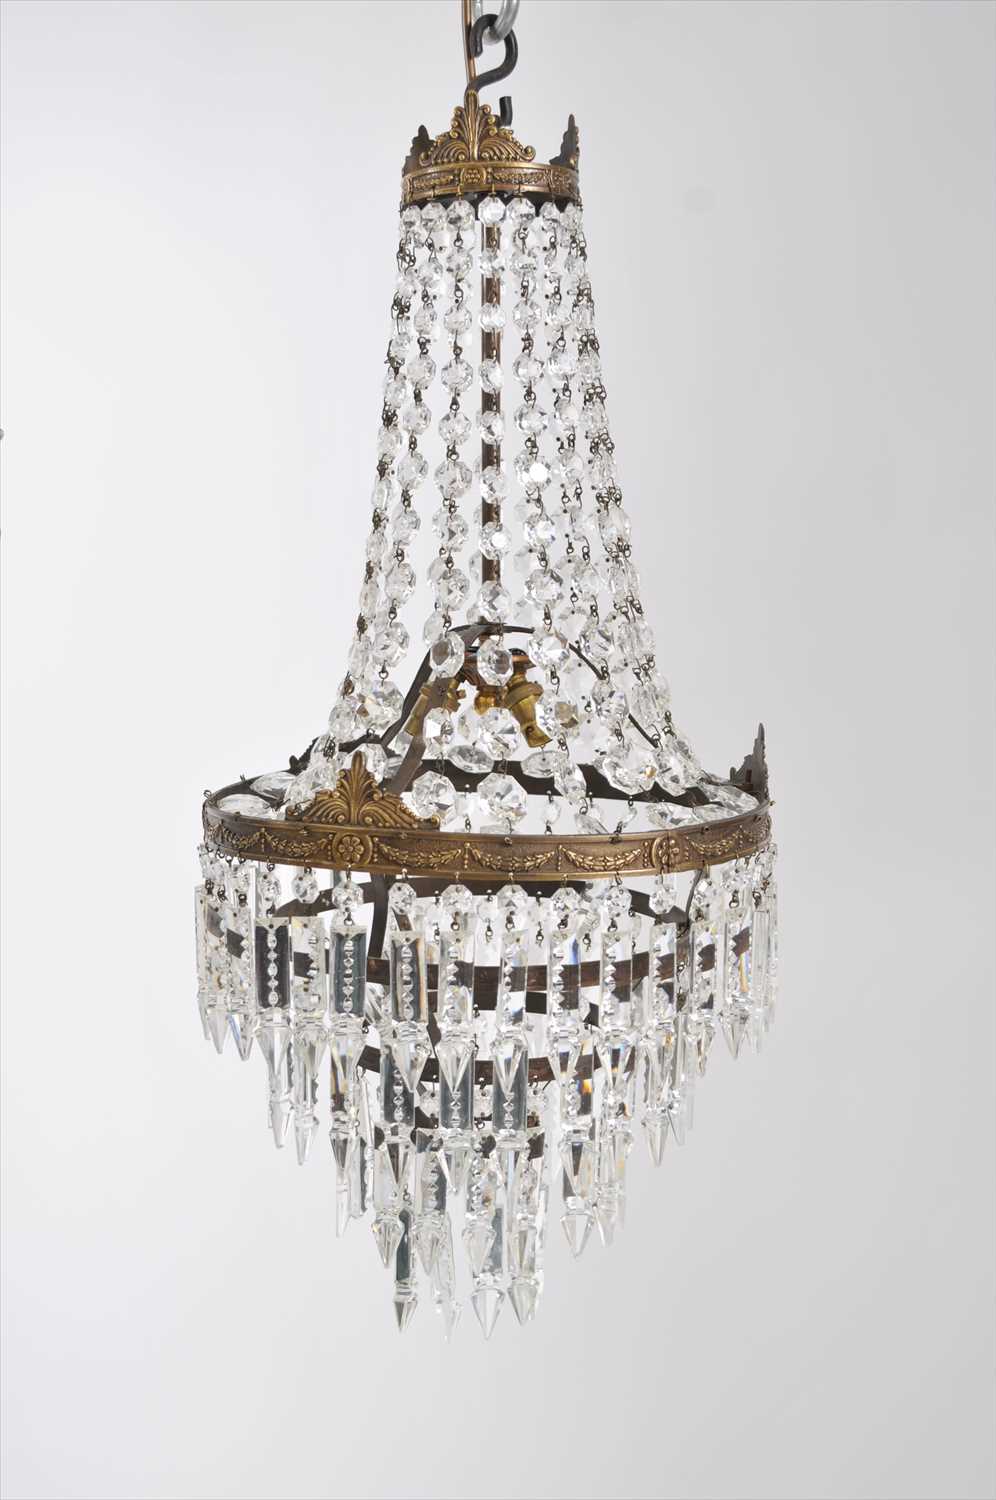 Lot 656 - An early 20th century three tier cascading drop ceiling chandelier